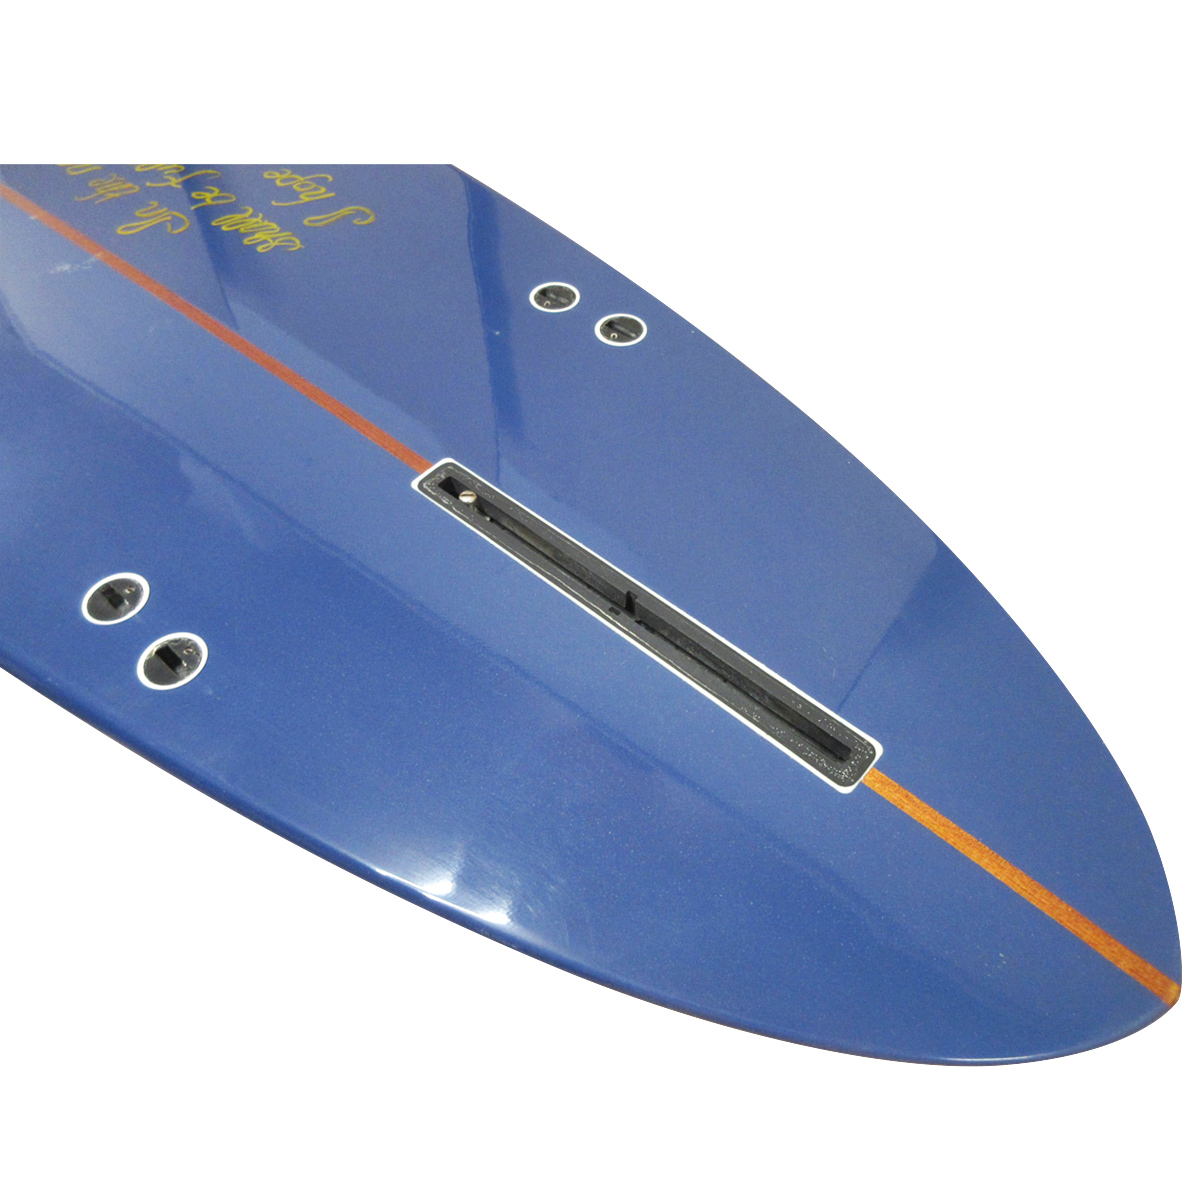 PSC Surfboards / All-round 9`1 Shaped by AZ